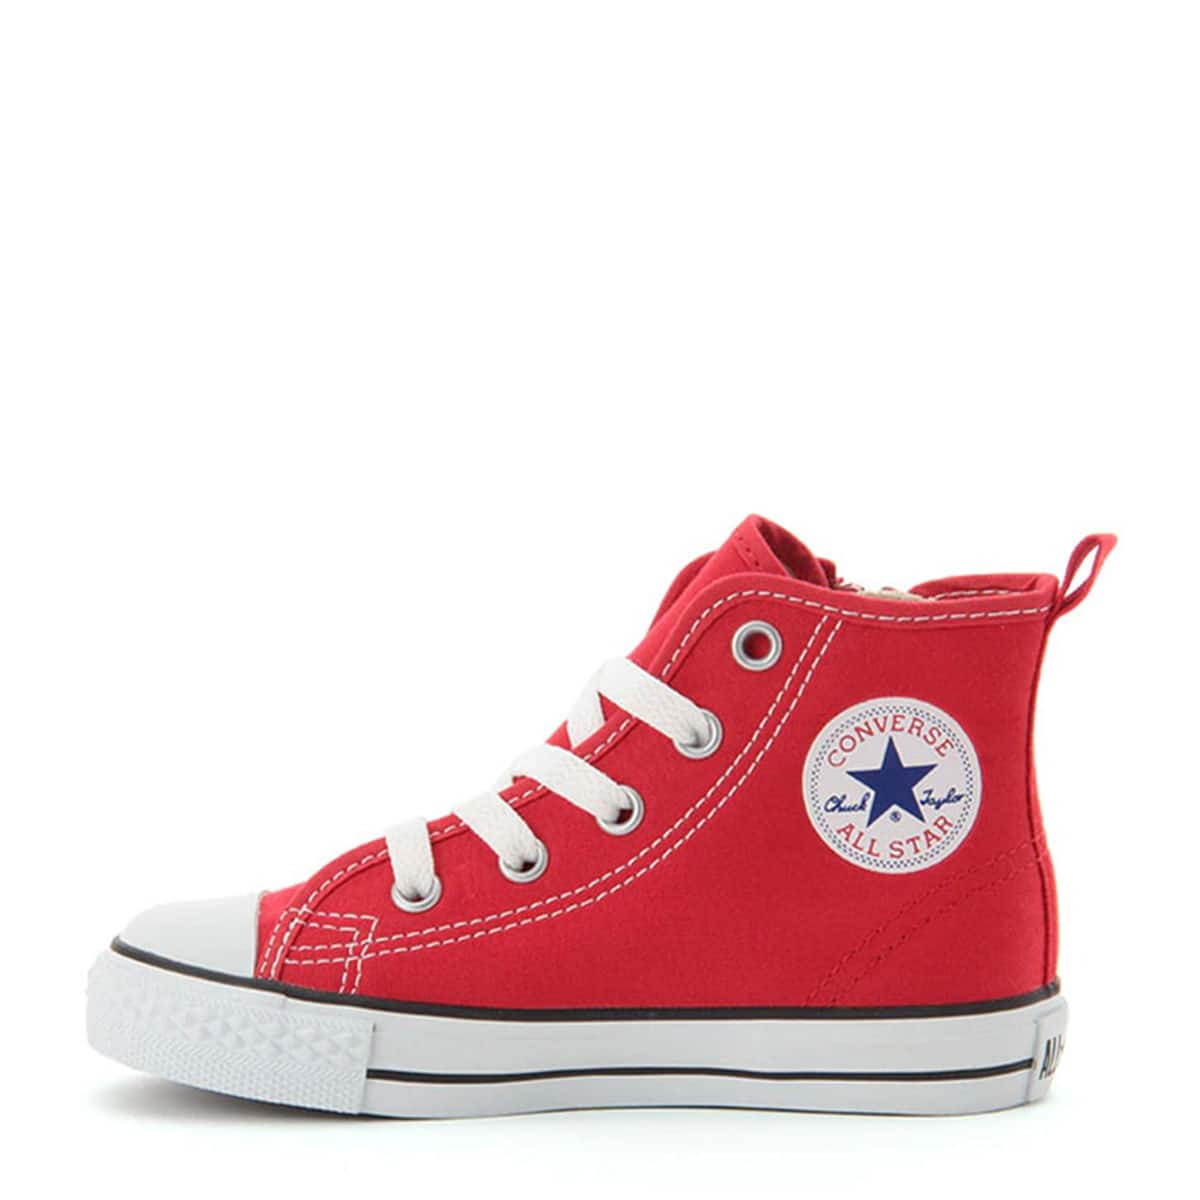 CONVERSE CHILD ALL STAR N Z HI レッド 24SS-I